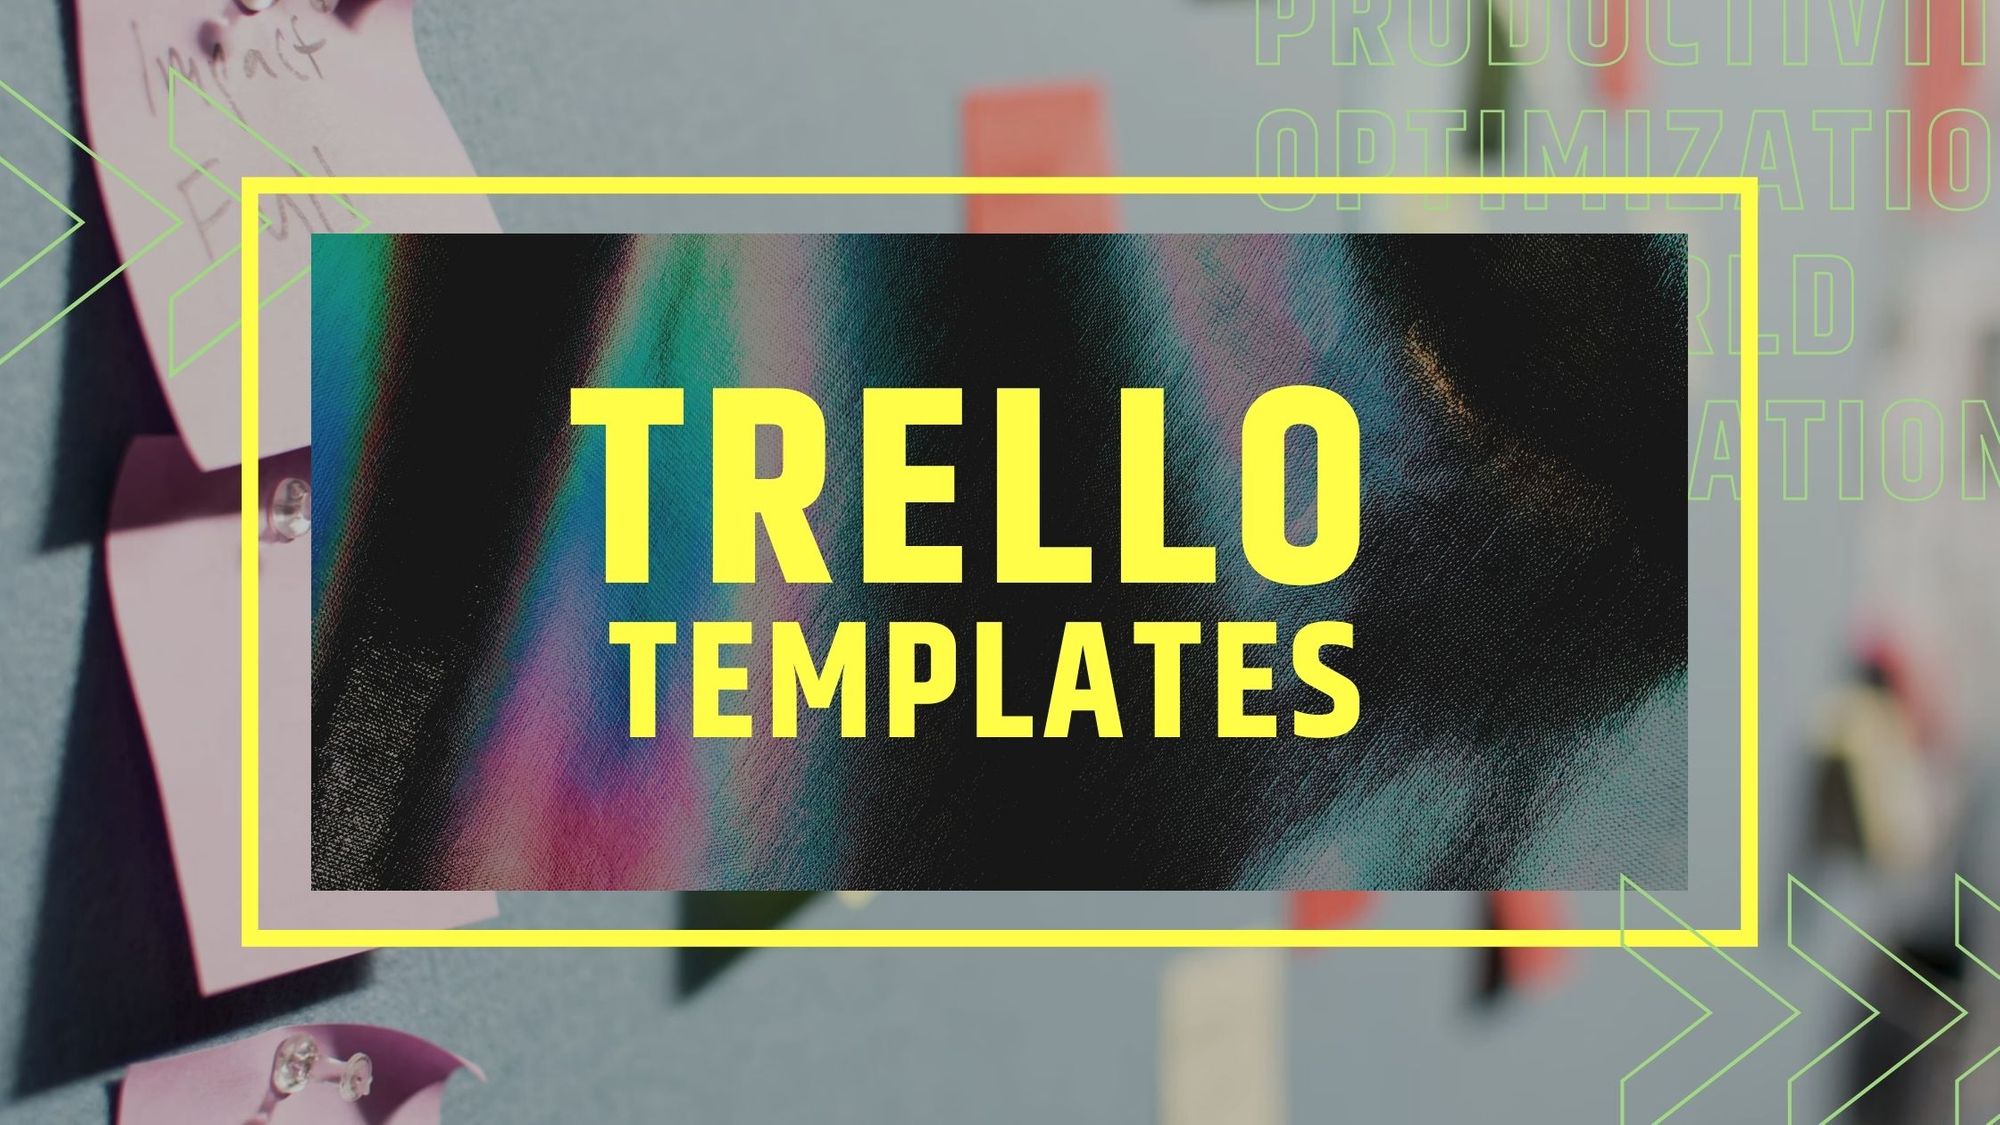 Project Hero Trello – What's the story about?